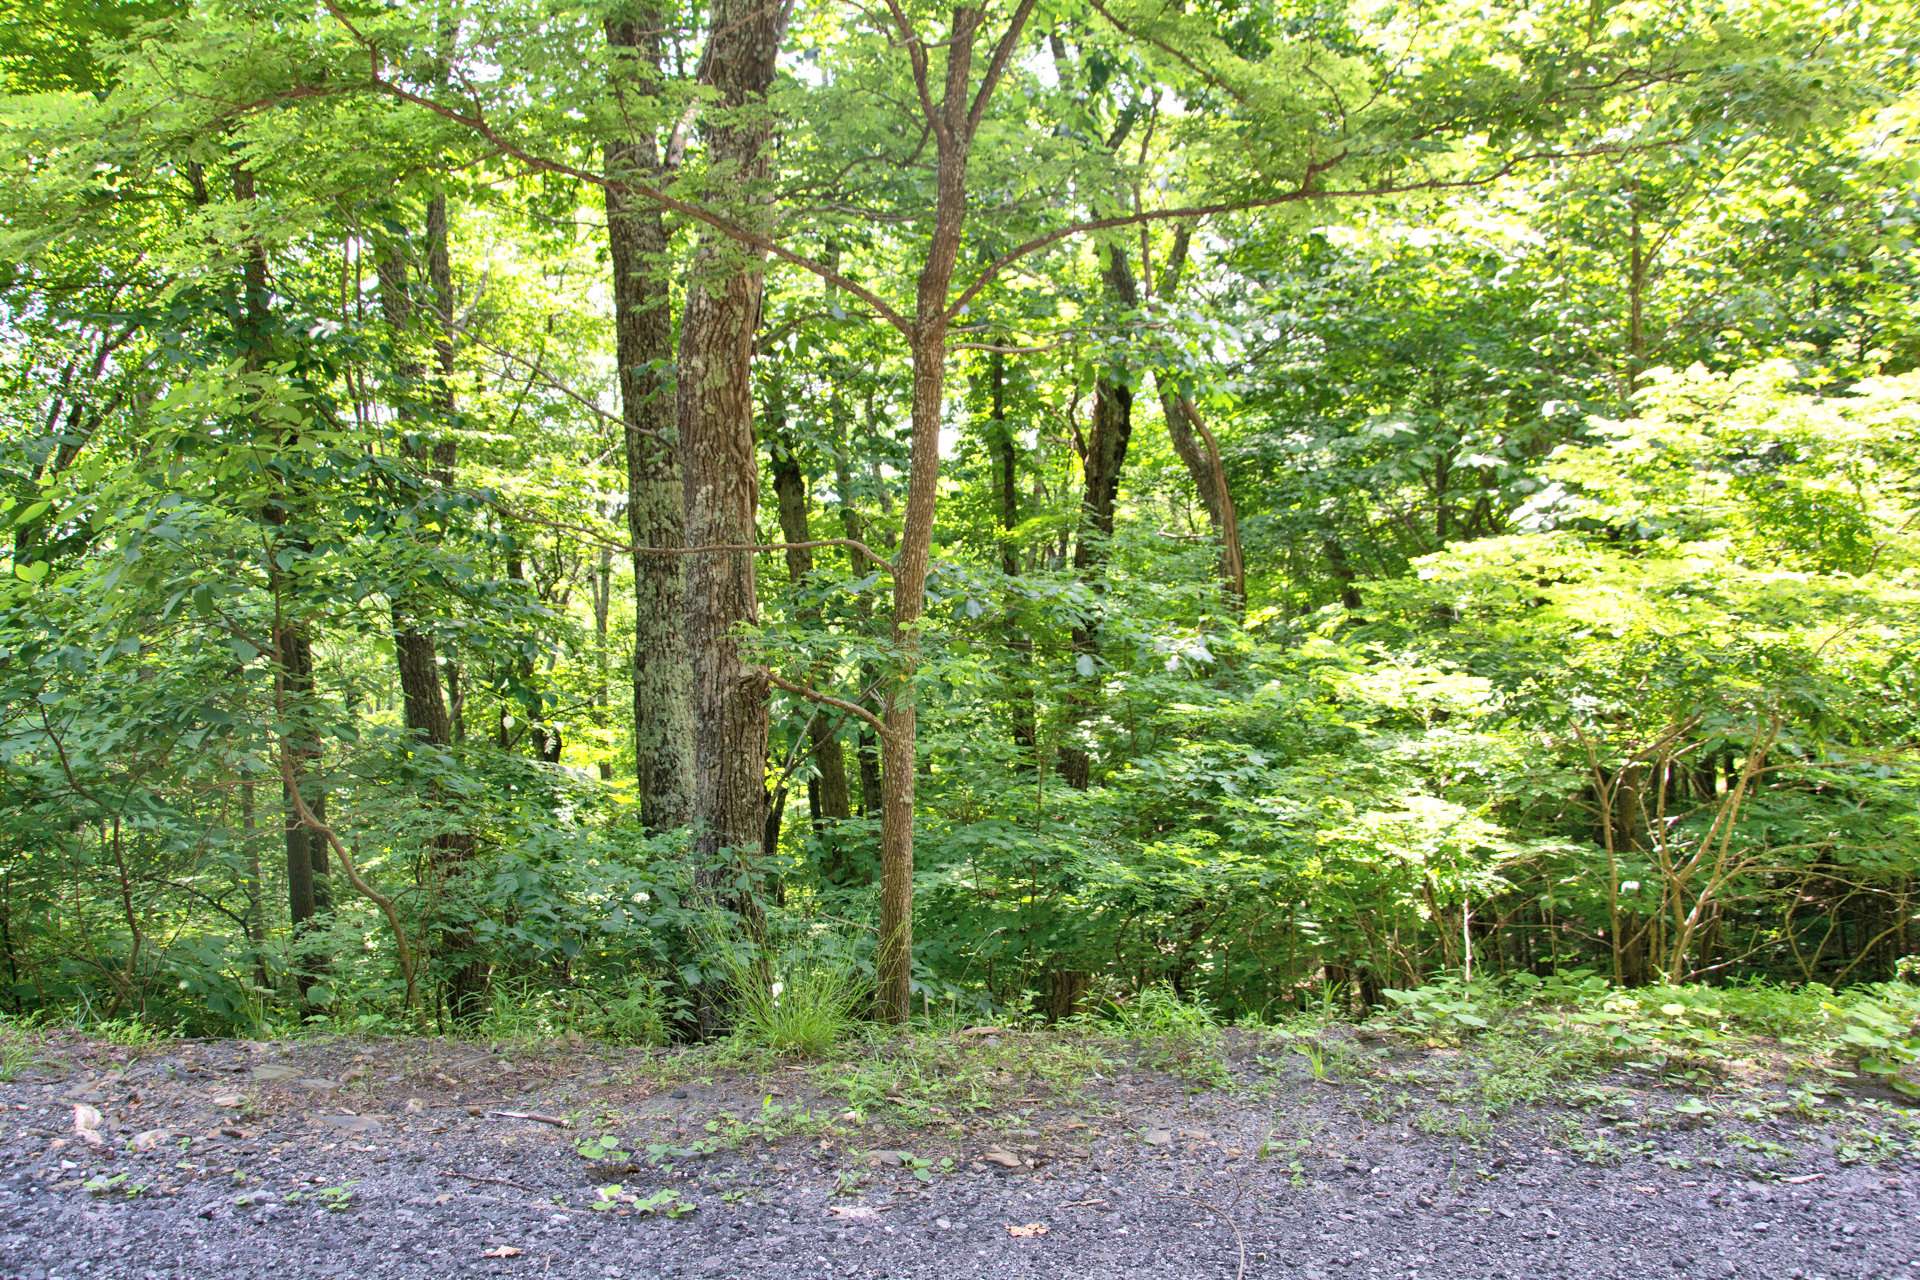 Lot 18, a 1.39 acre home site in Stonebridge features shared well rights and offered at $45,000.